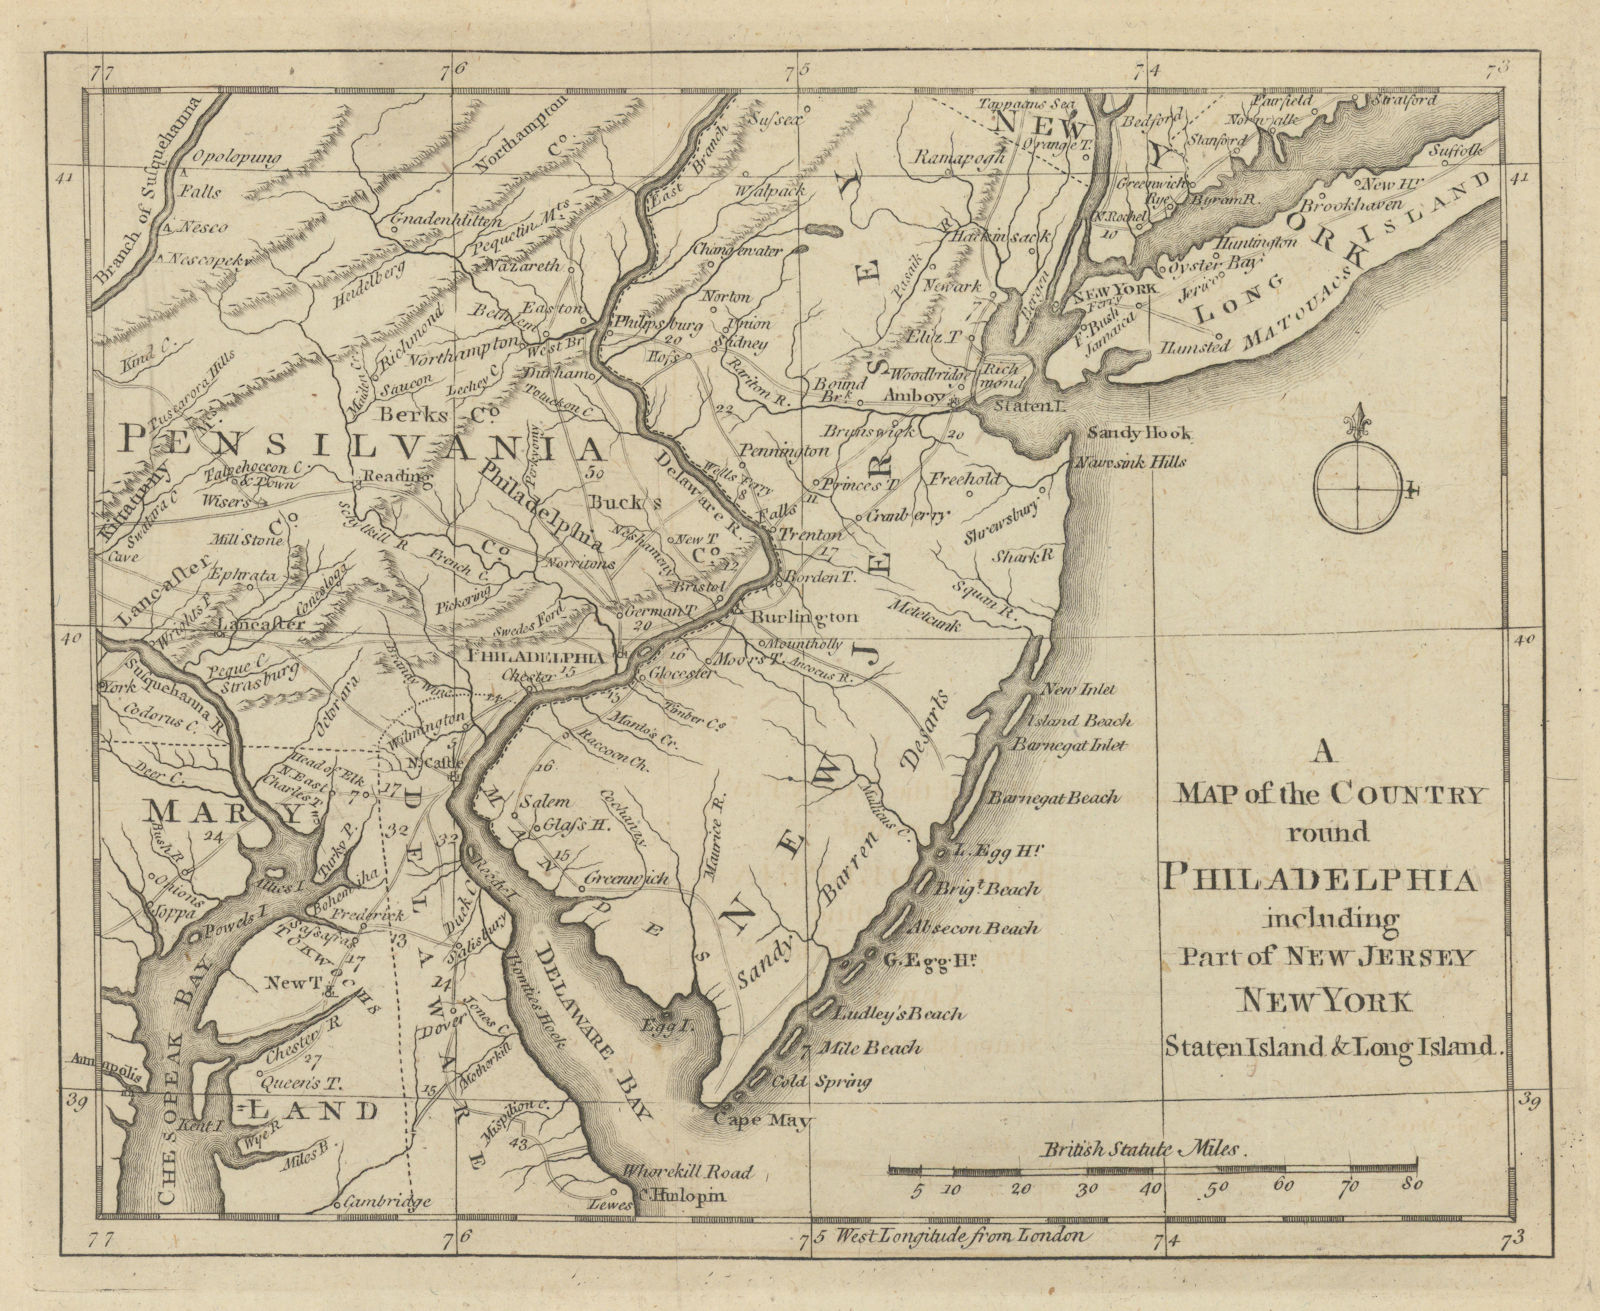 The country round Philadelphia. New Jersey Pennsylvania NY. GENTS MAG 1776 map